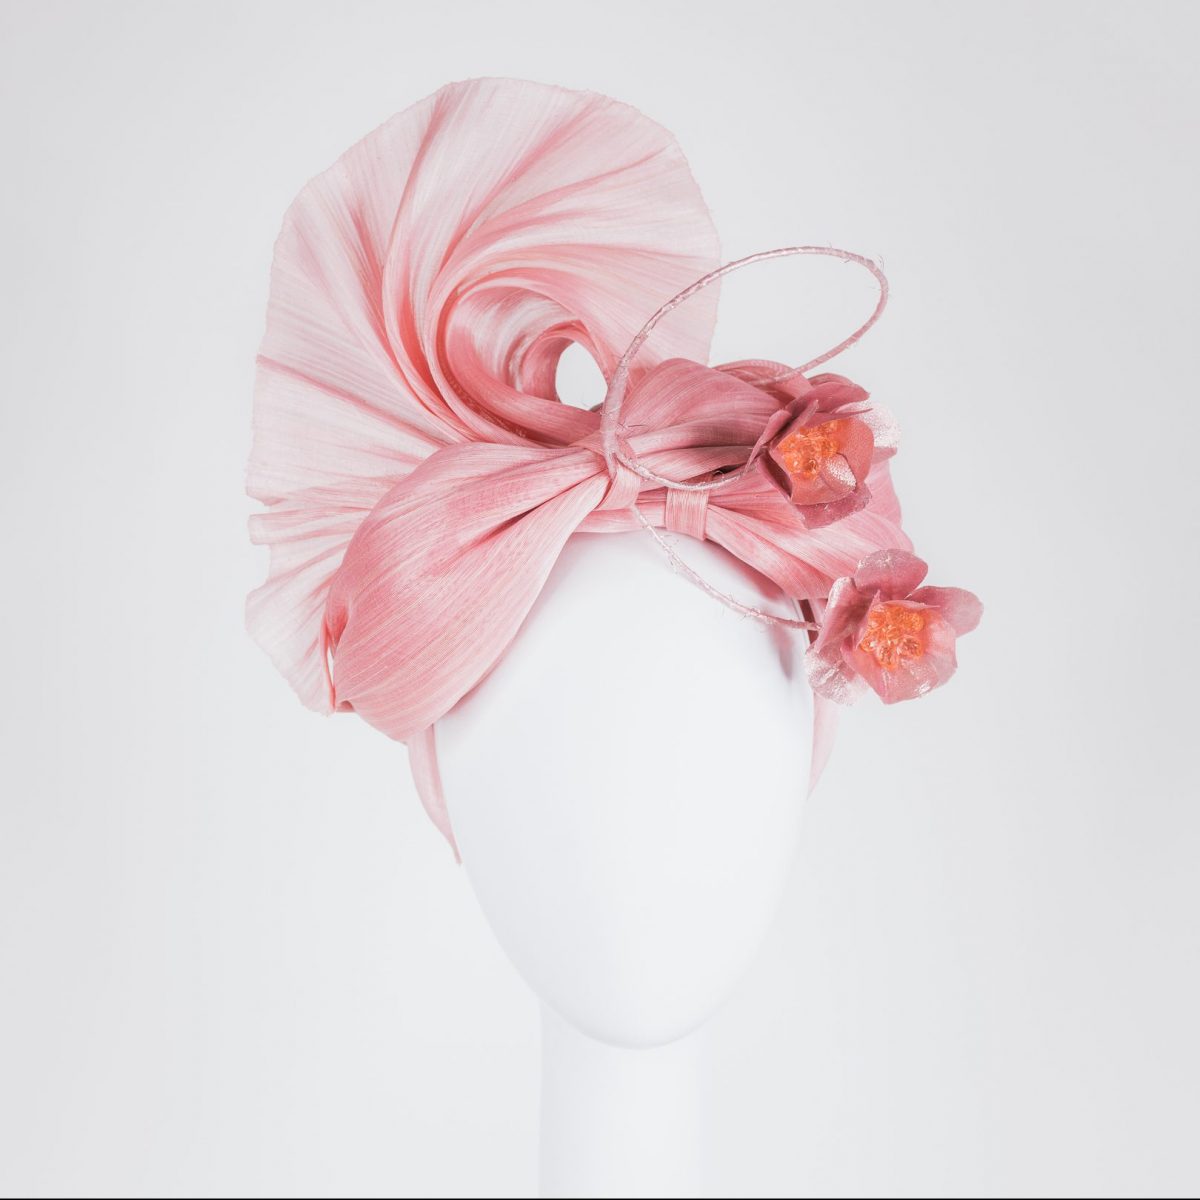 Silk Abaca - Headpiece in pink for the FTOF Fashions on the Field - Designer Millinery from Melbourne